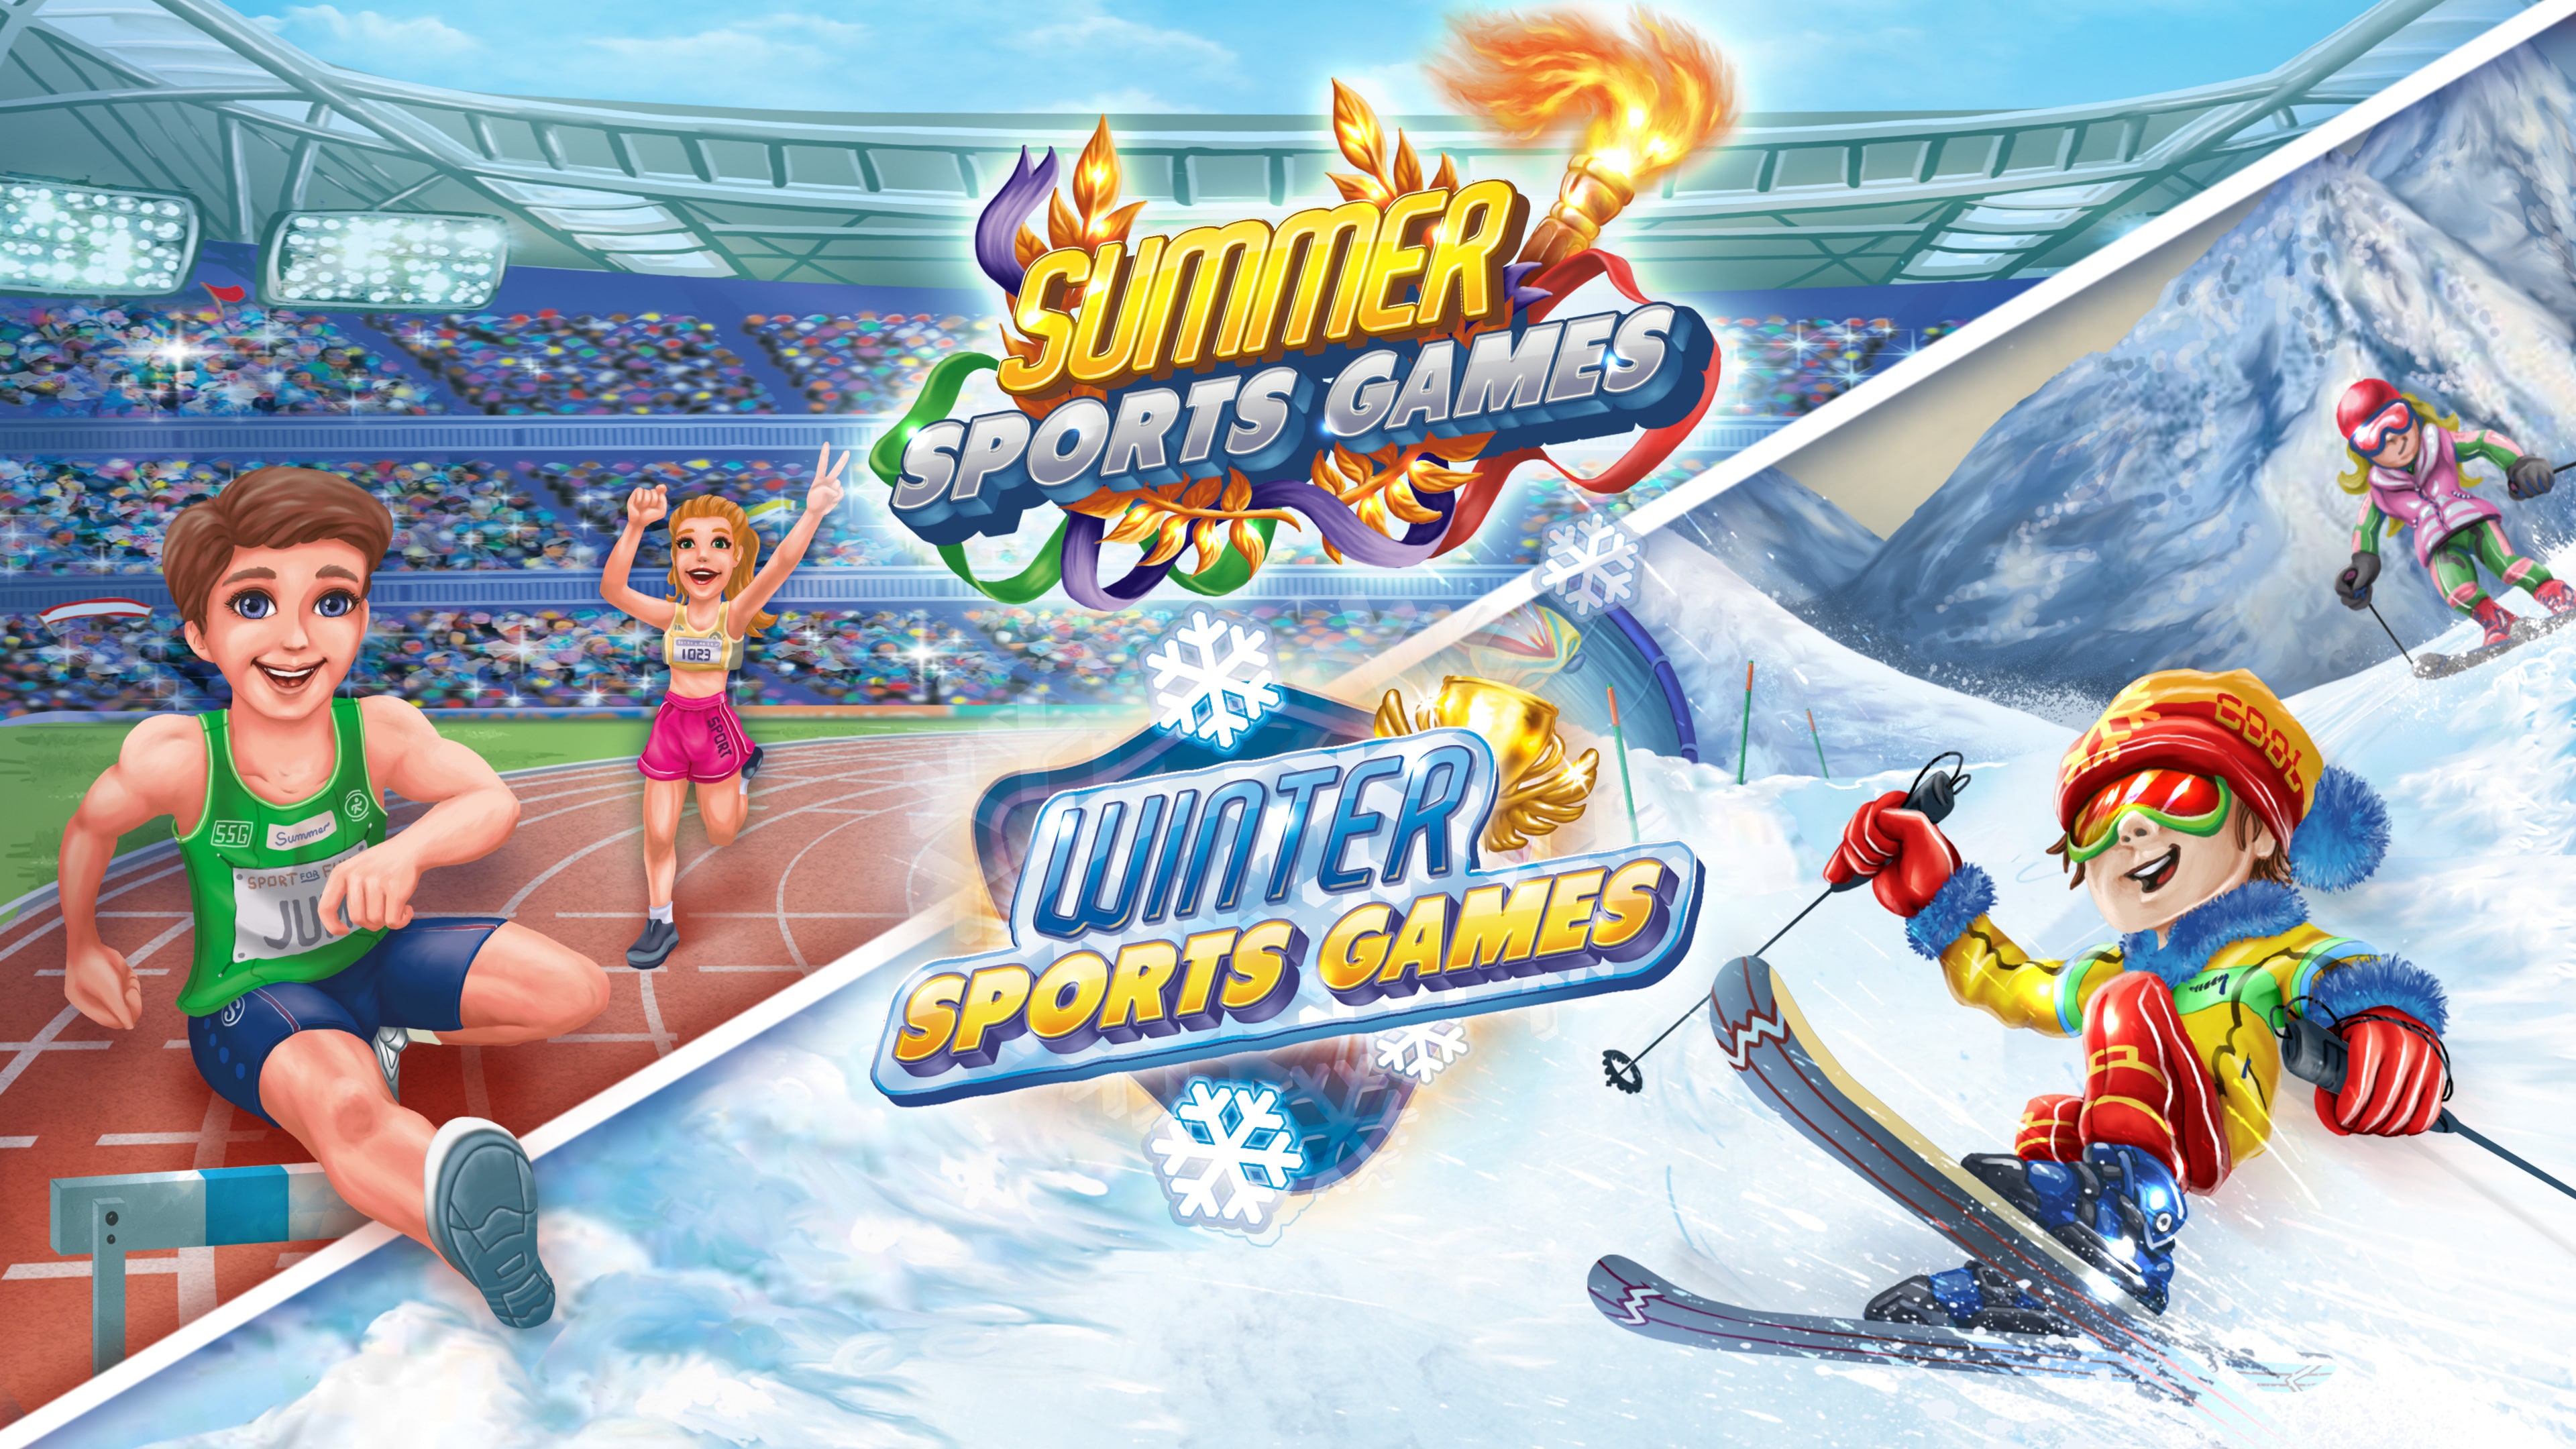 Summer and Winter Sports Games Bundle - 4K Edition (English)